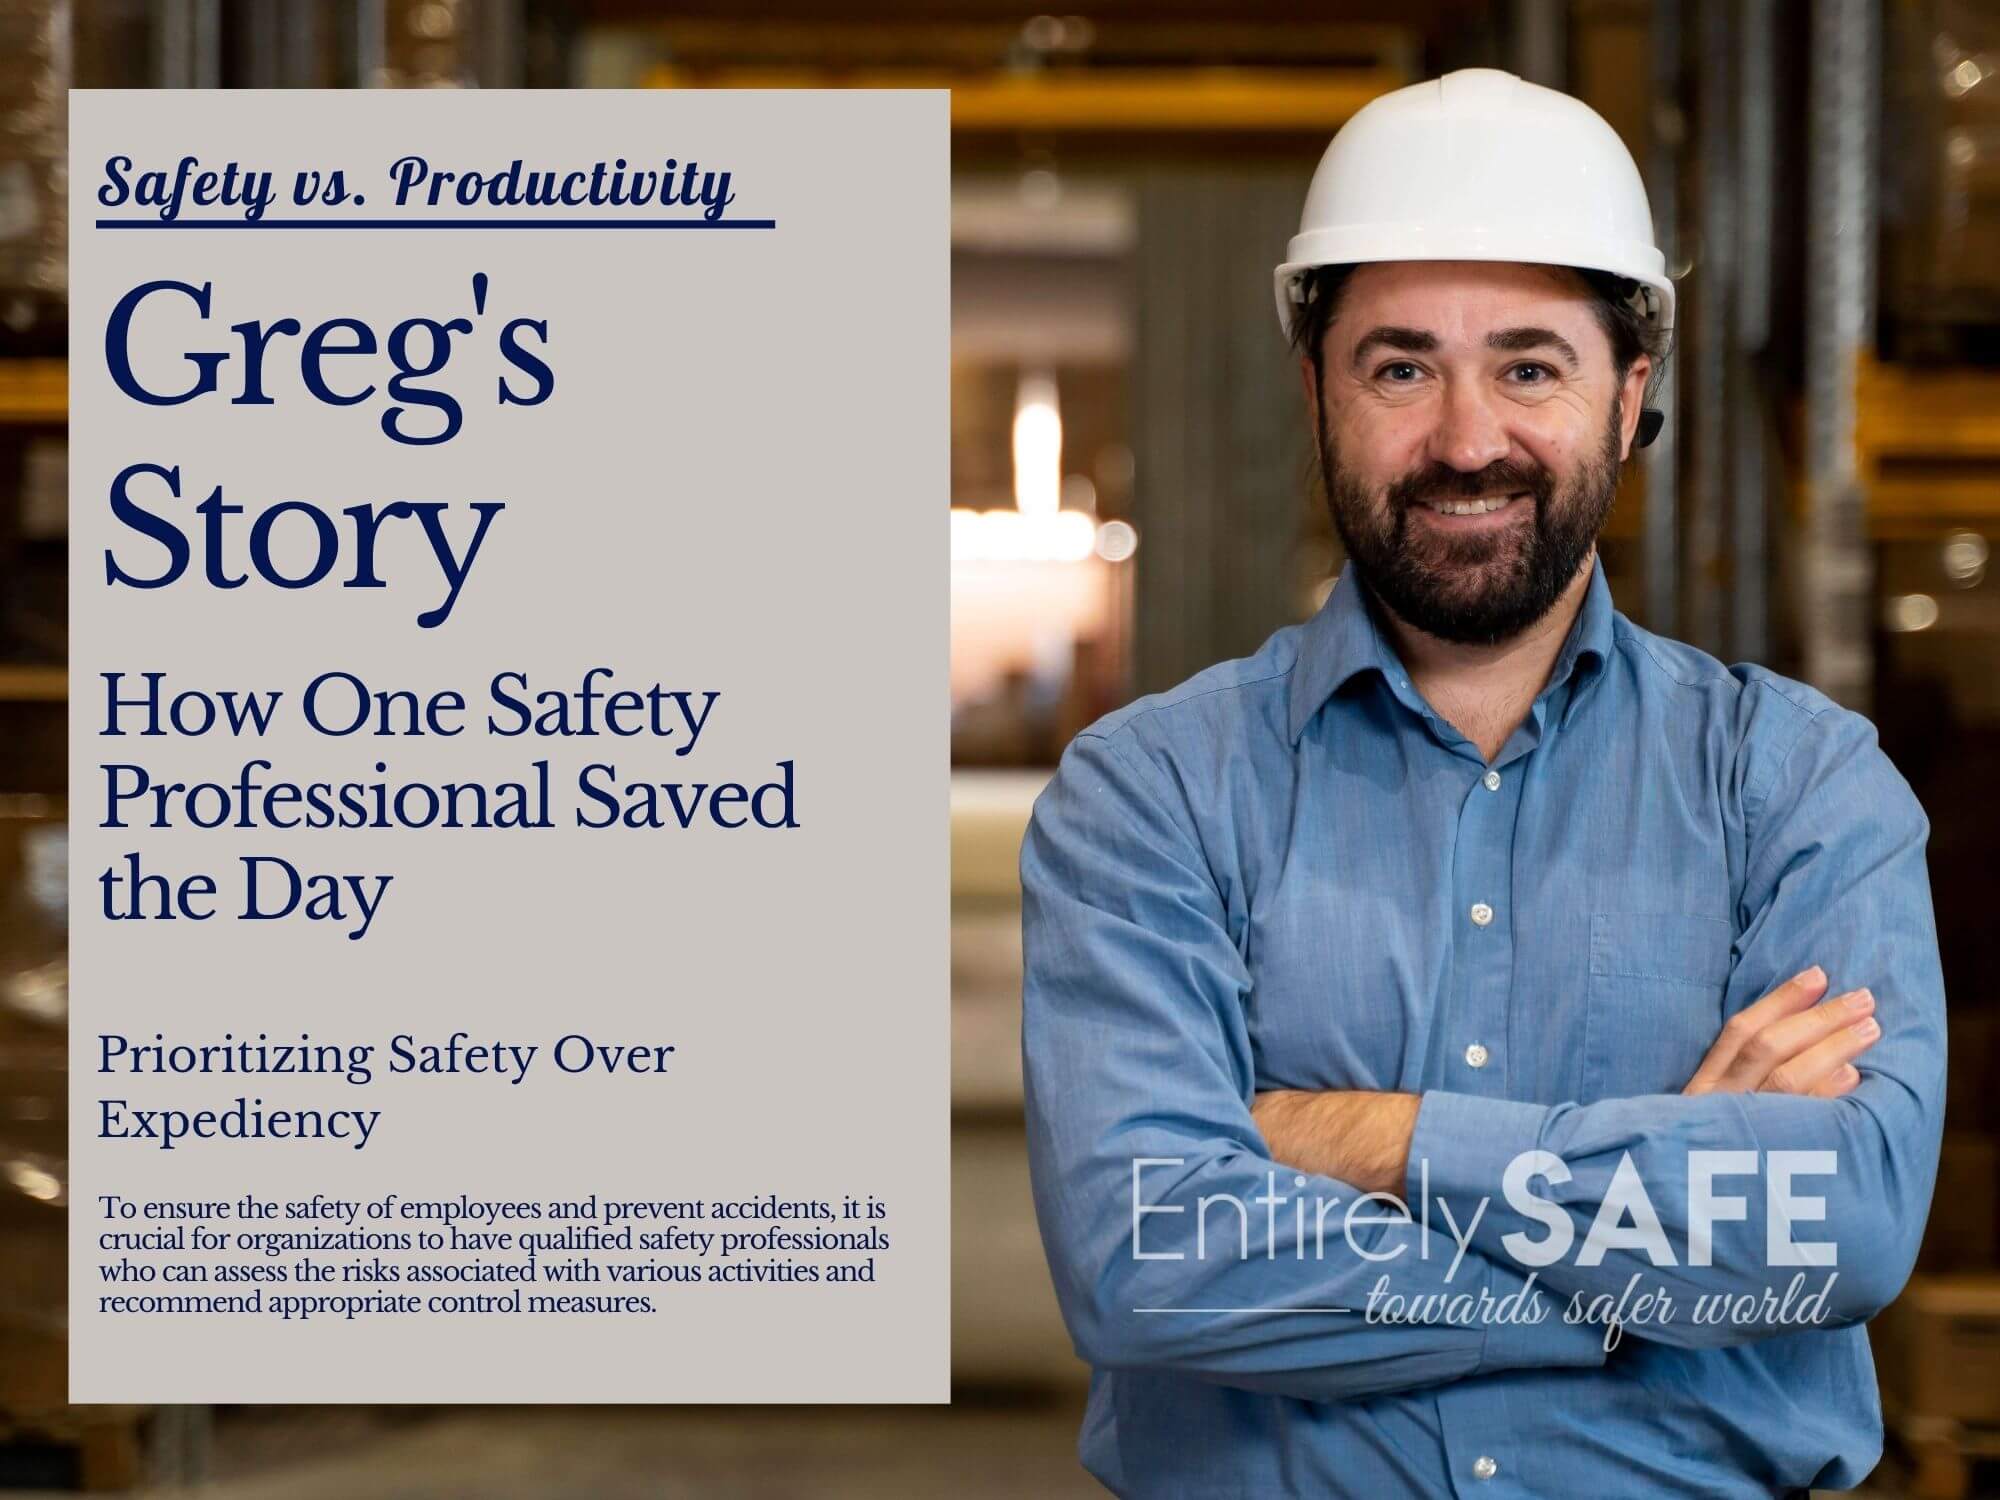 Greg’s Story. How One Safety Professional Saved the Day.